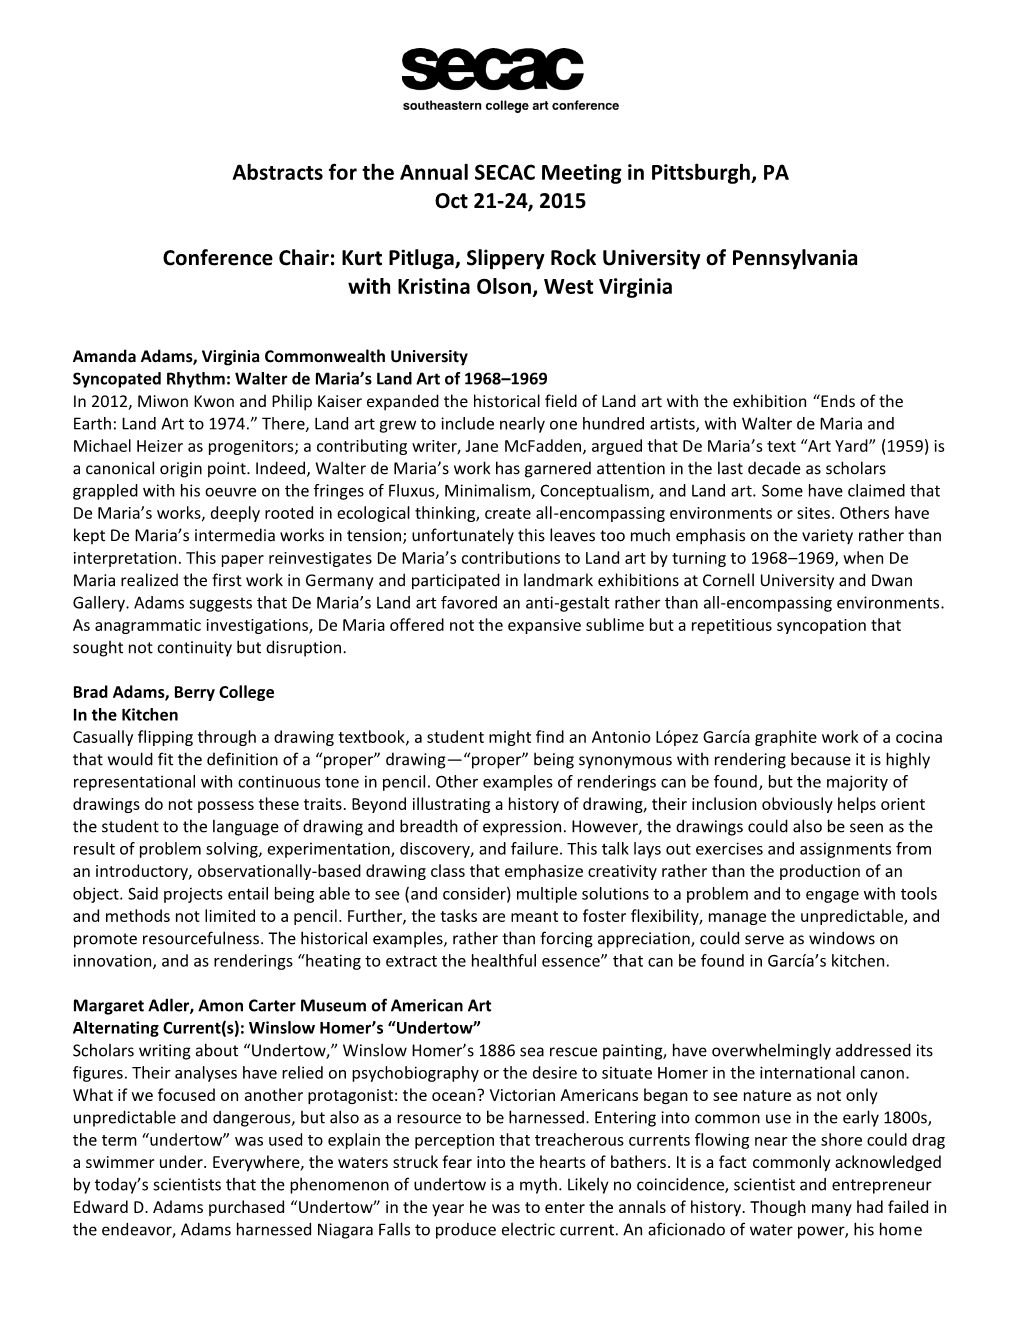 Abstracts for the Annual SECAC Meeting in Pittsburgh, PA Oct 21-24, 2015